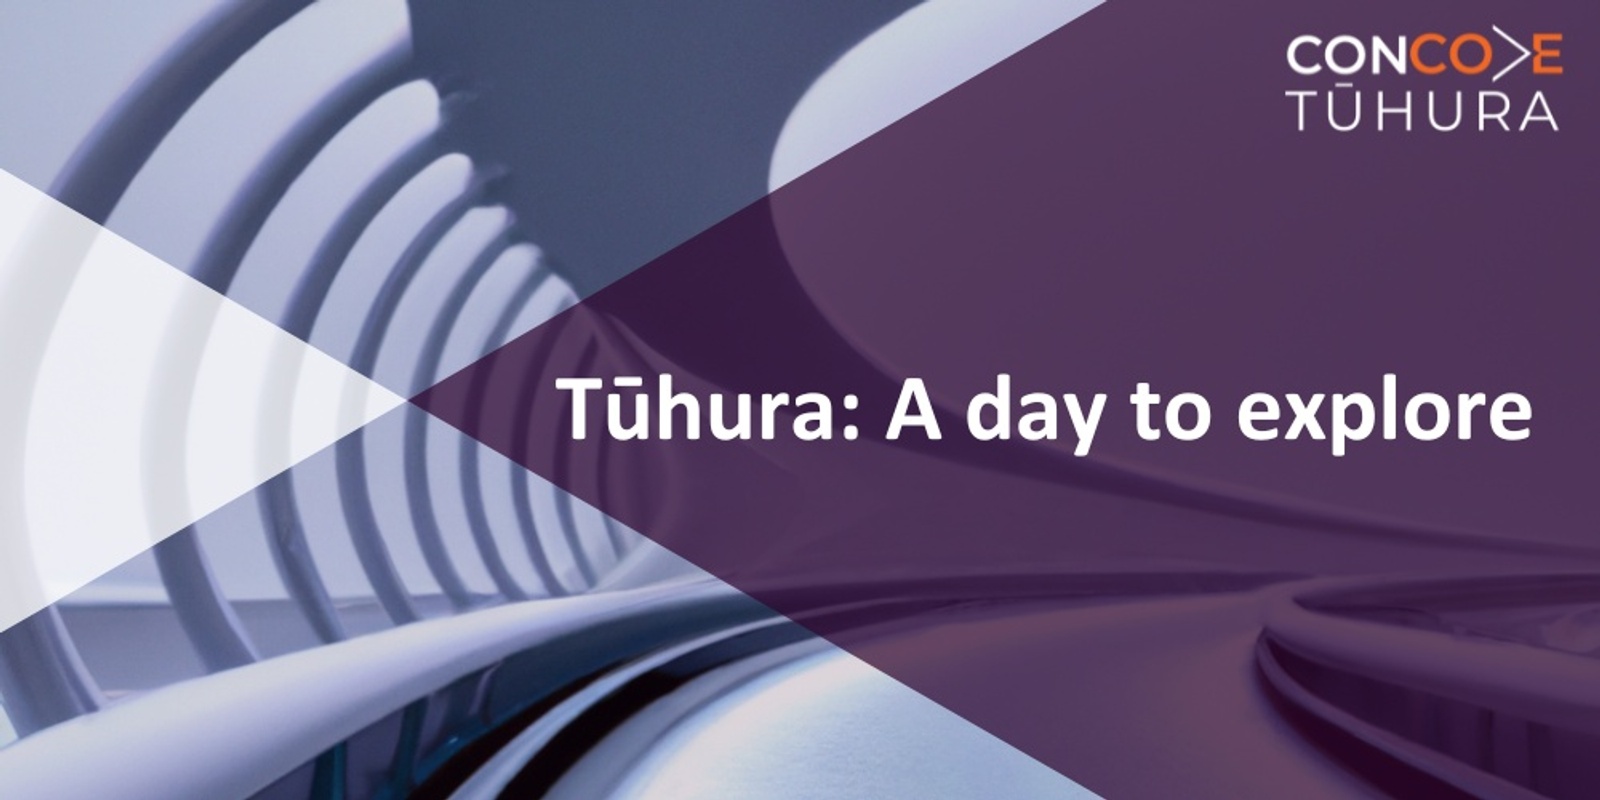 Banner image for Tūhura: A day to explore 